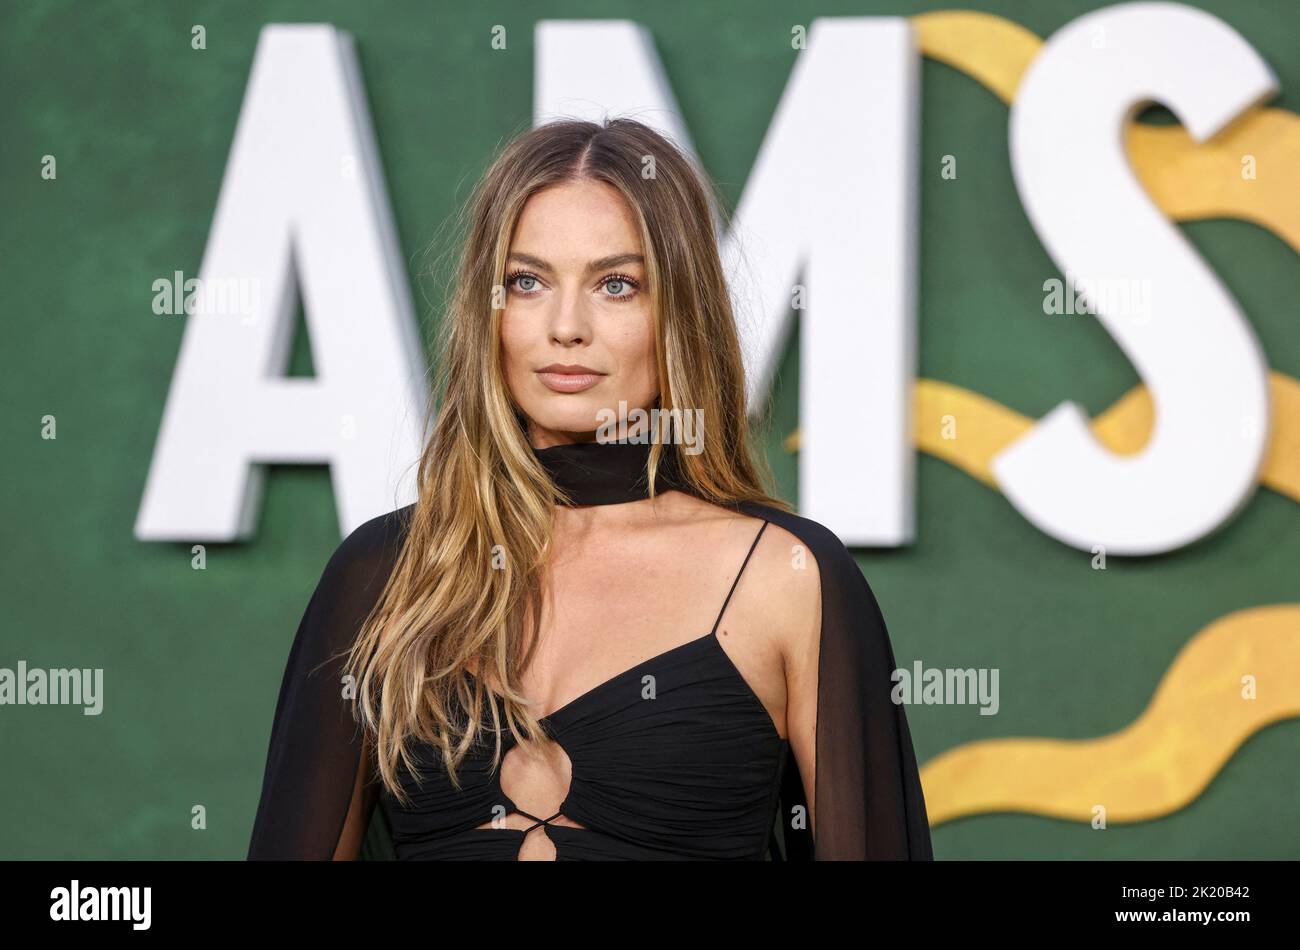 Cast member Margot Robbie attends the European premiere of the film 'Amsterdam', in London, Britain September 21, 2022. REUTERS/Tom Nicholson Stock Photo